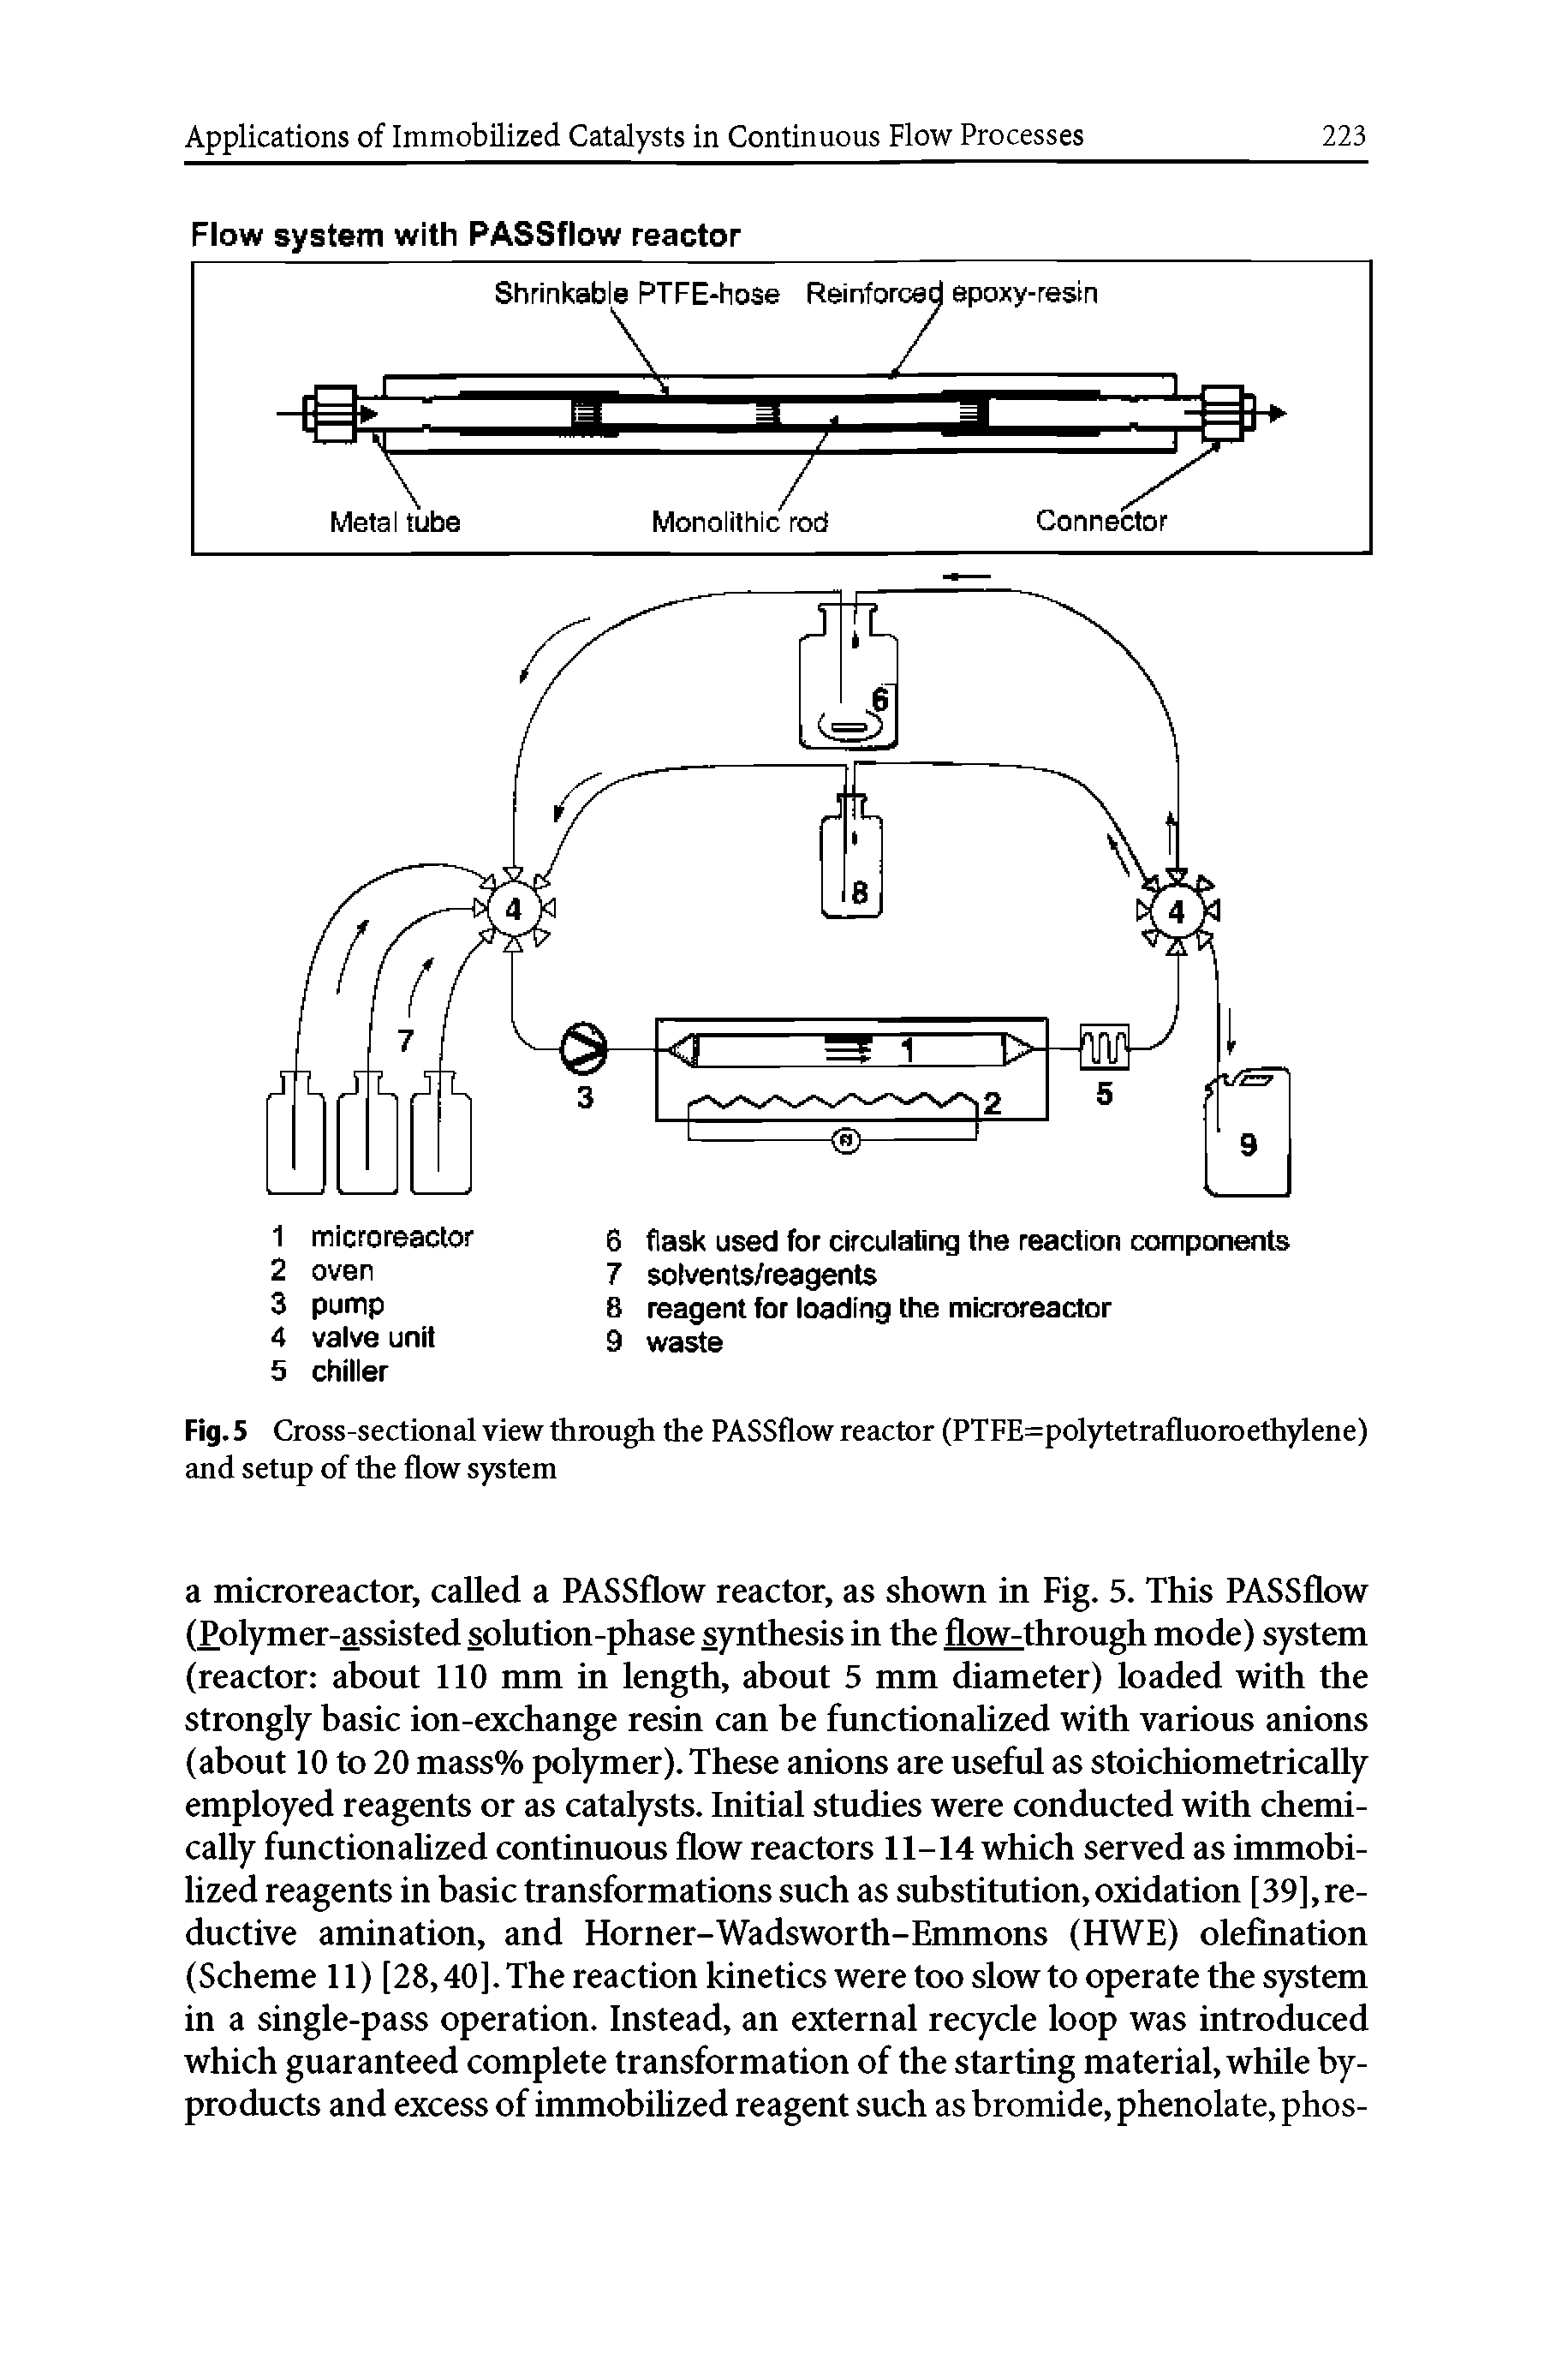 Fig. 5 Cross-sectional view through the PASSflow reactor (PTFE=polytetrafluoroethylene) and setup of the flow system...